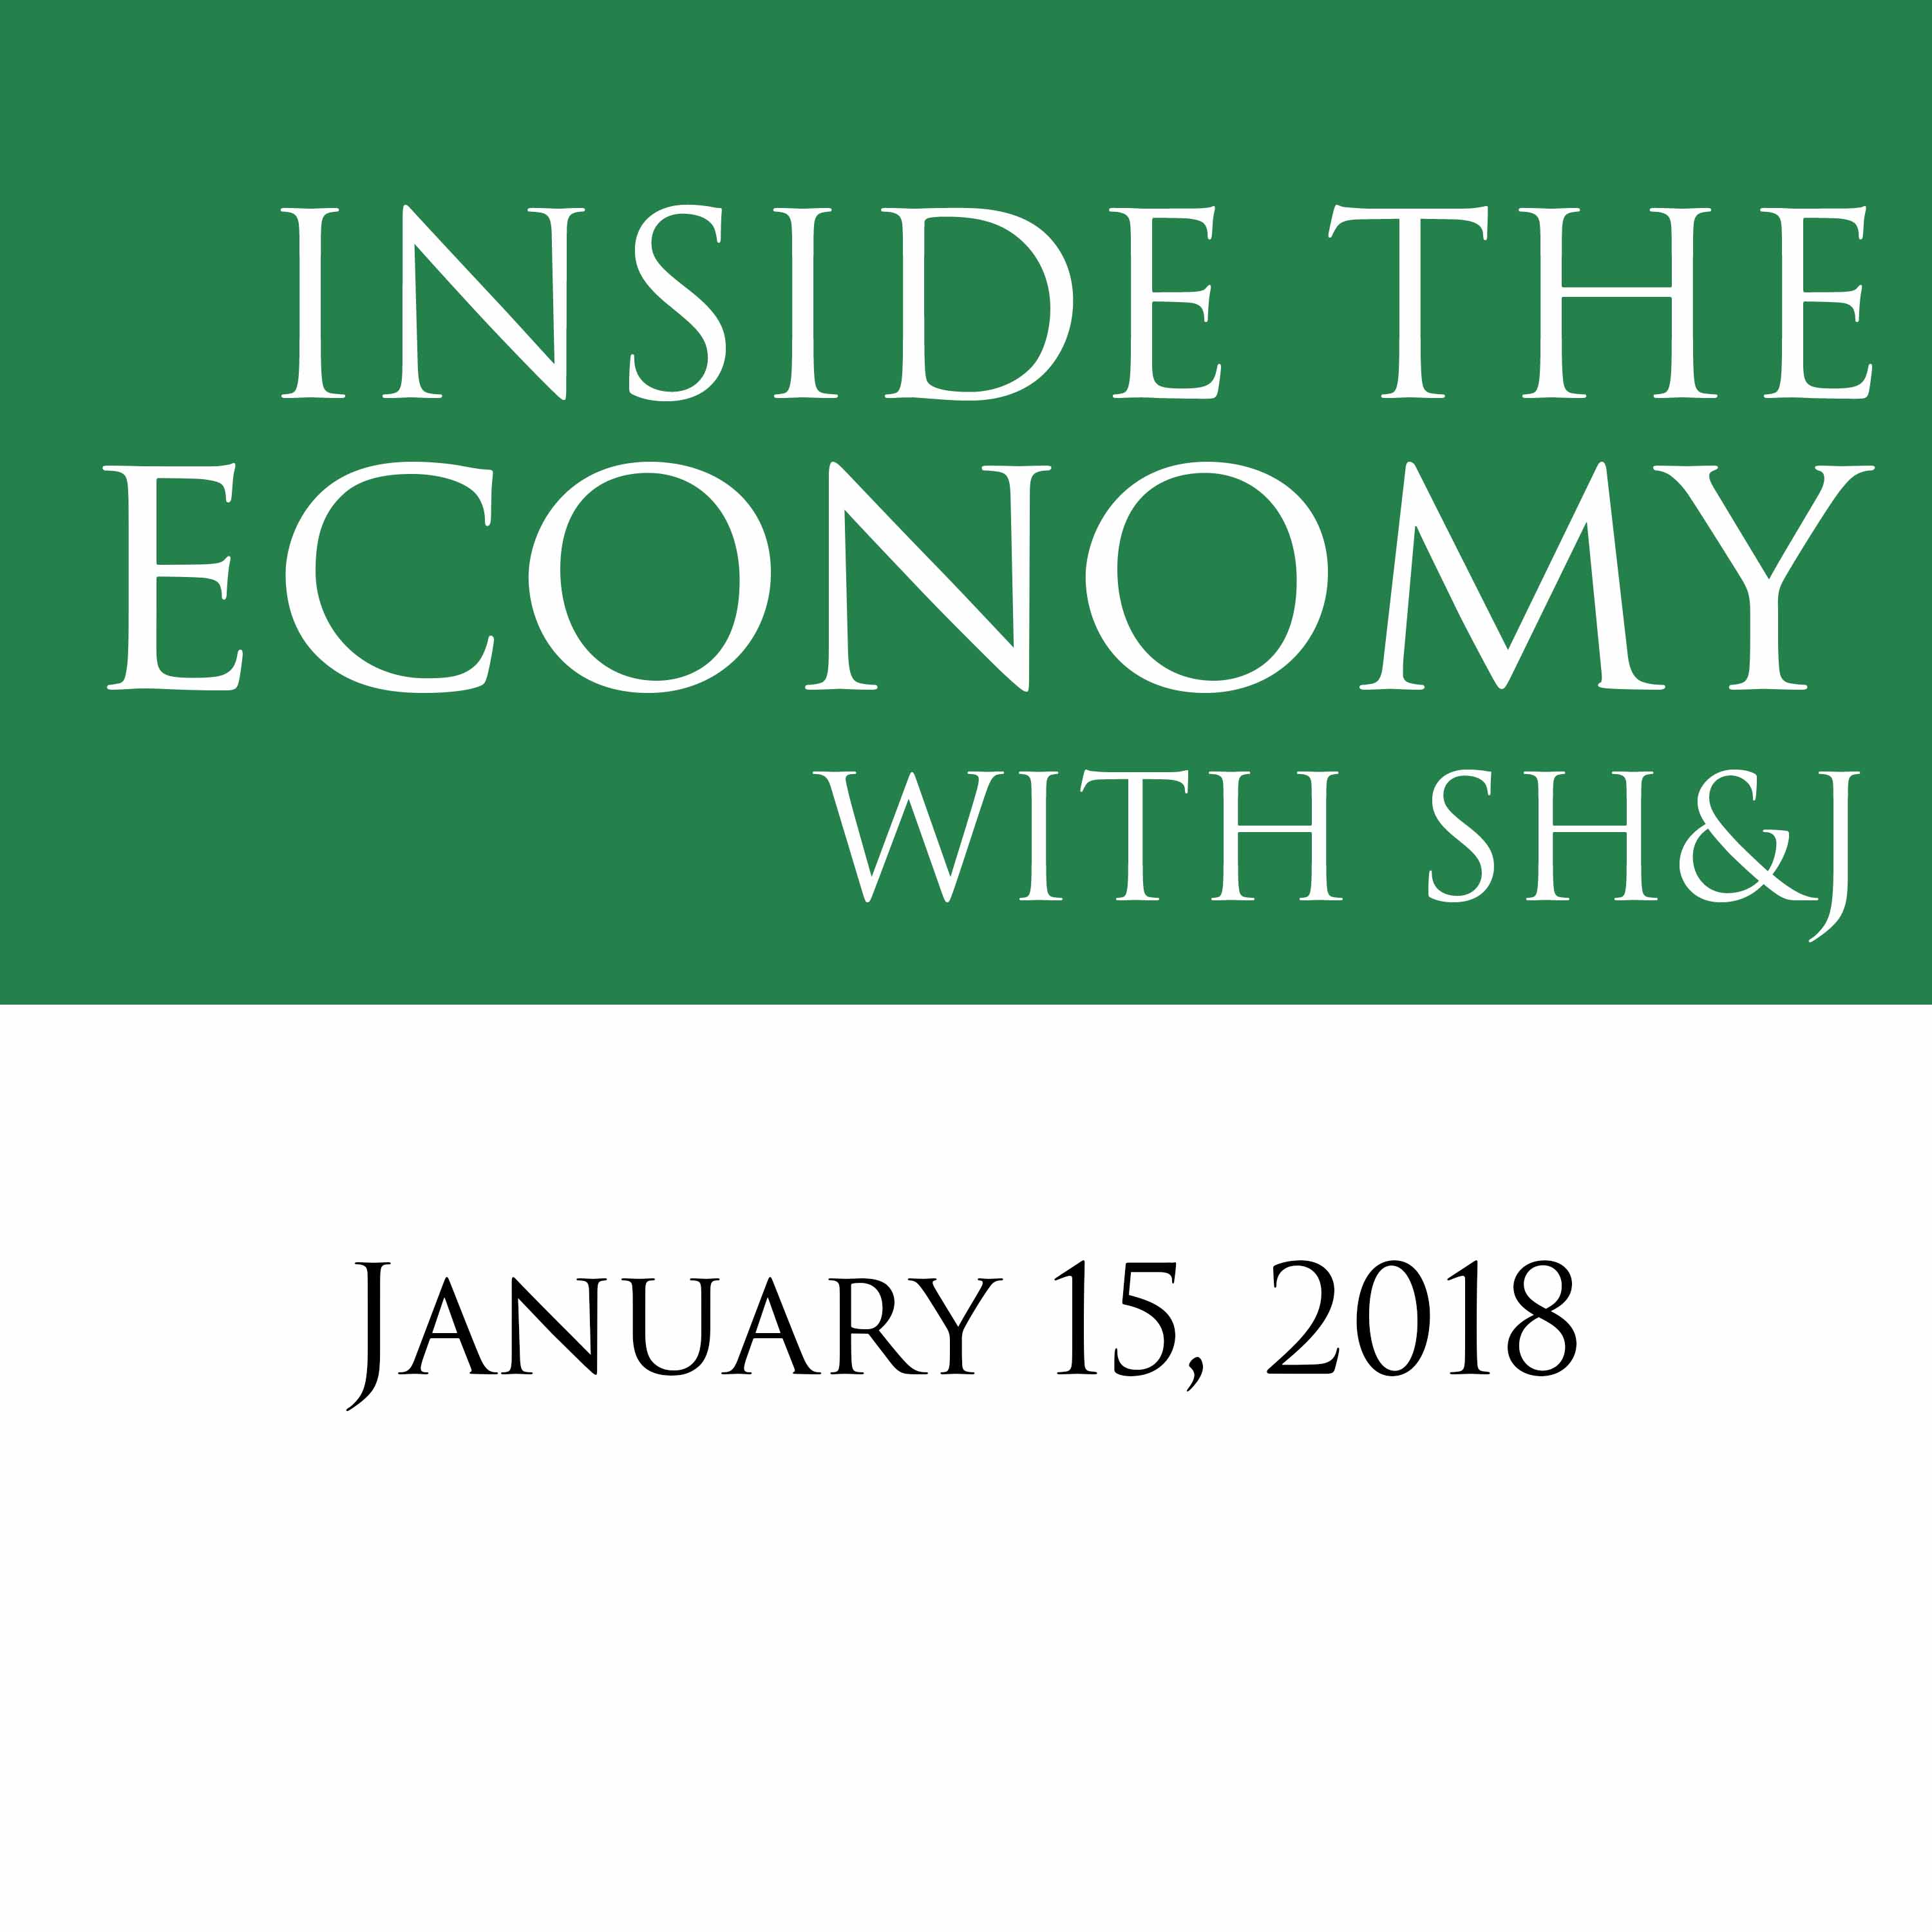 Inside the Economy with SH&J: A Look at 2018